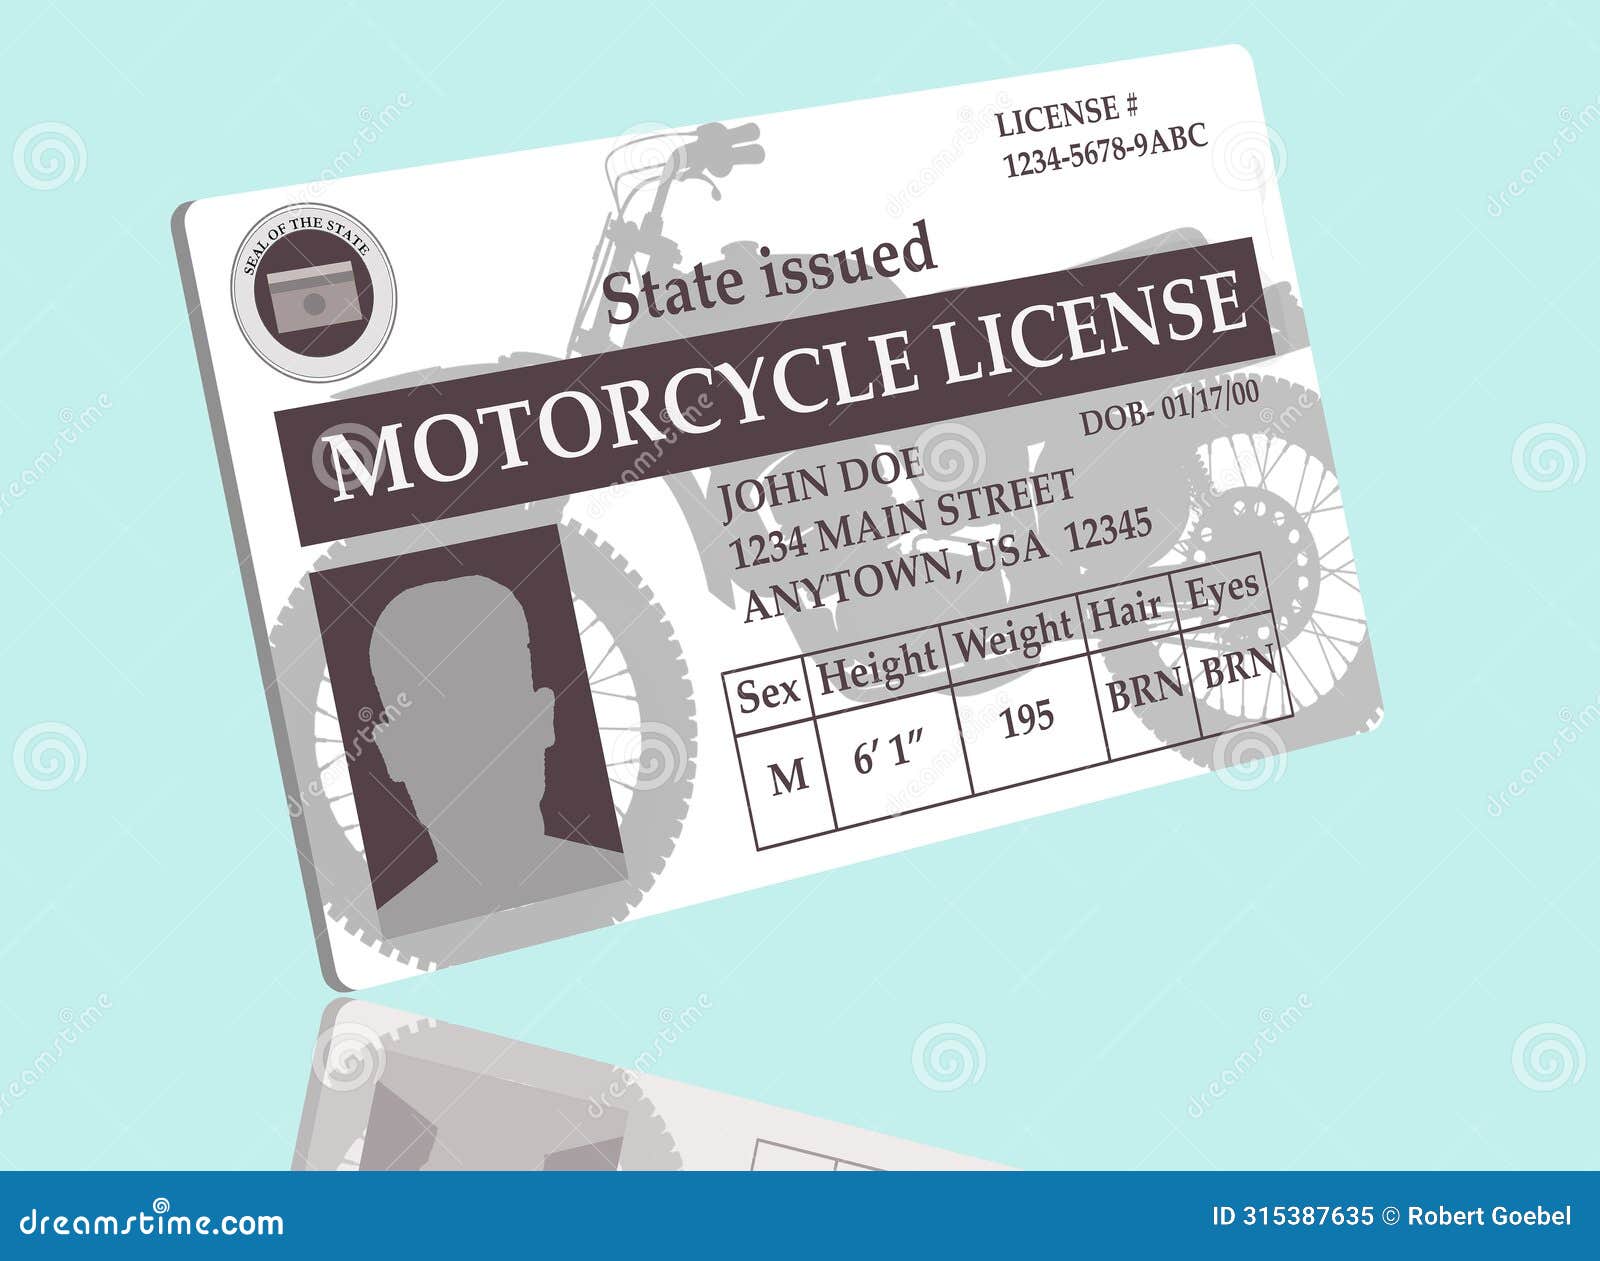 a mock, generic state issued motorcycle license for bike riders in seen  on the background